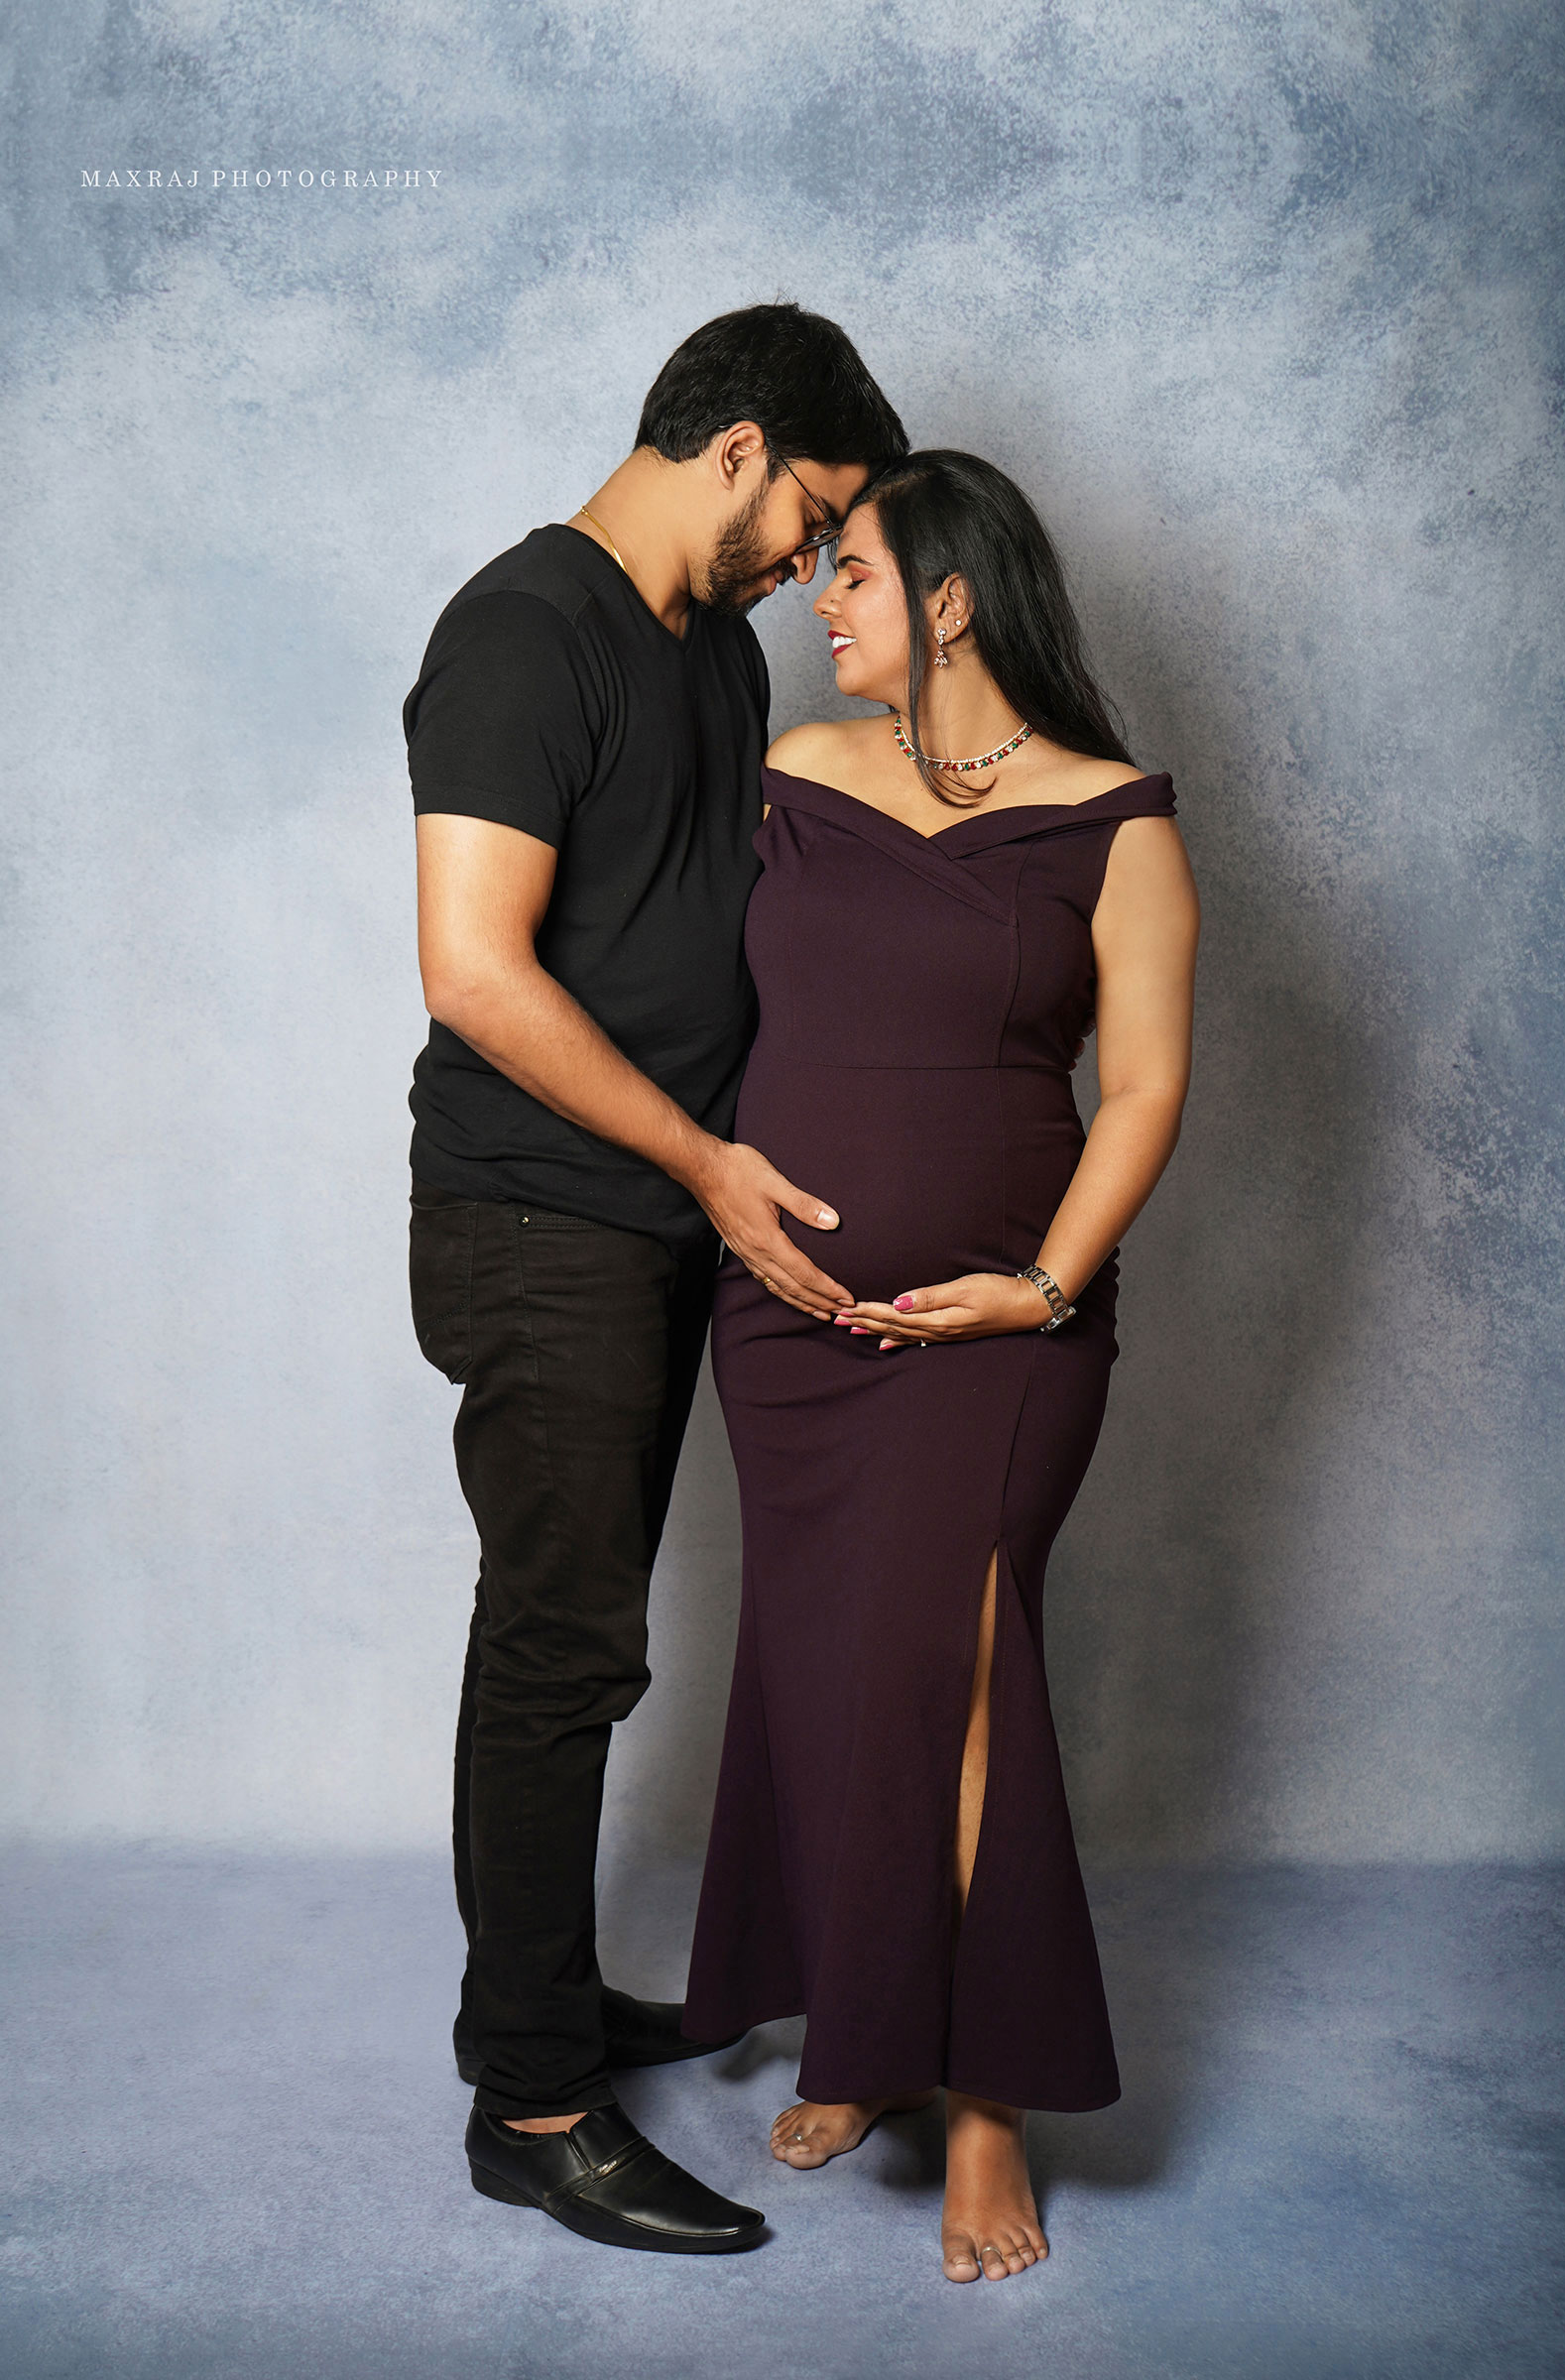 best maternity photographer in pune, best maternity photographer in india, maternity photoshoot in pune in pink gown